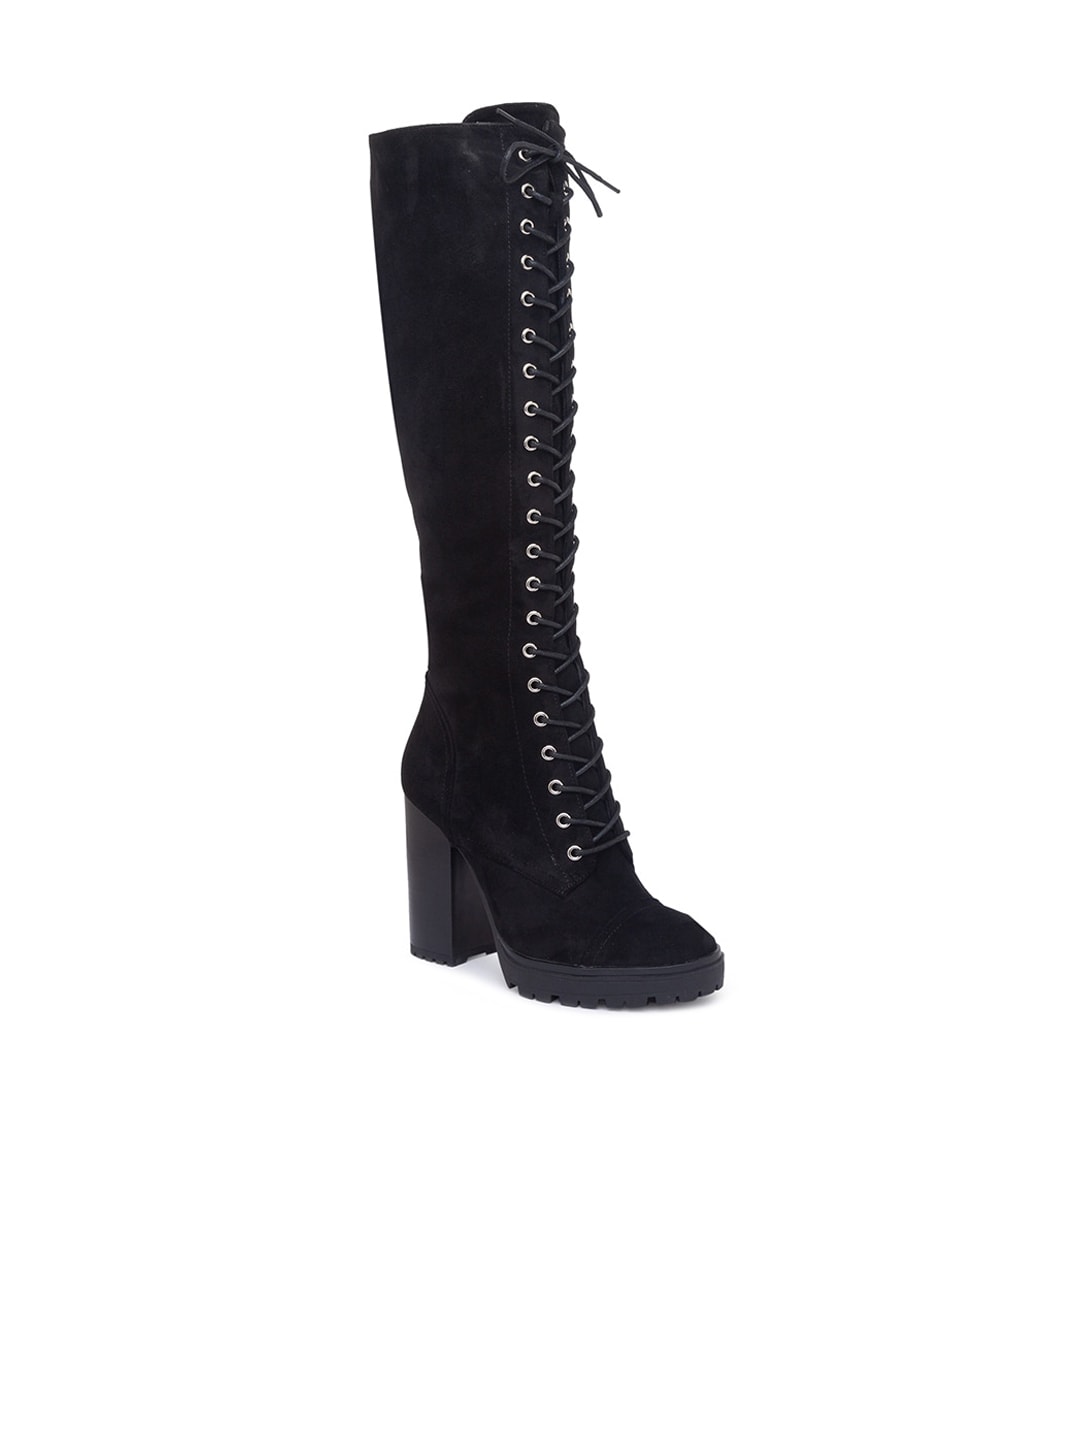 Sole To Soul Women Black Suede High-Top Block Heeled Boots Price in India